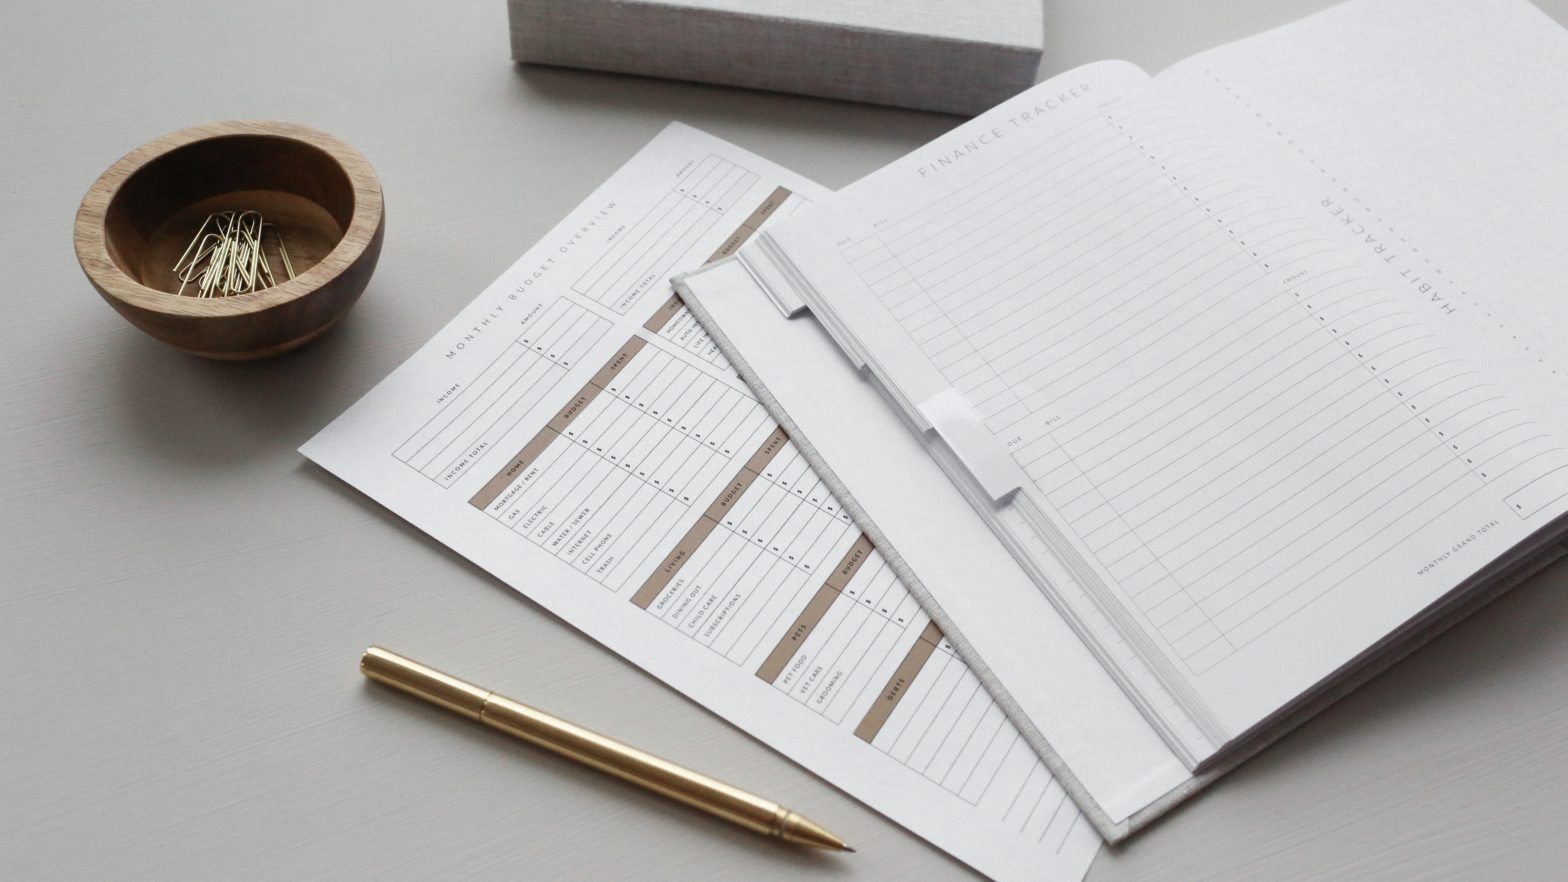 A photo of budgeting and financial documents on a grey desk with a pencil and gold paperclips